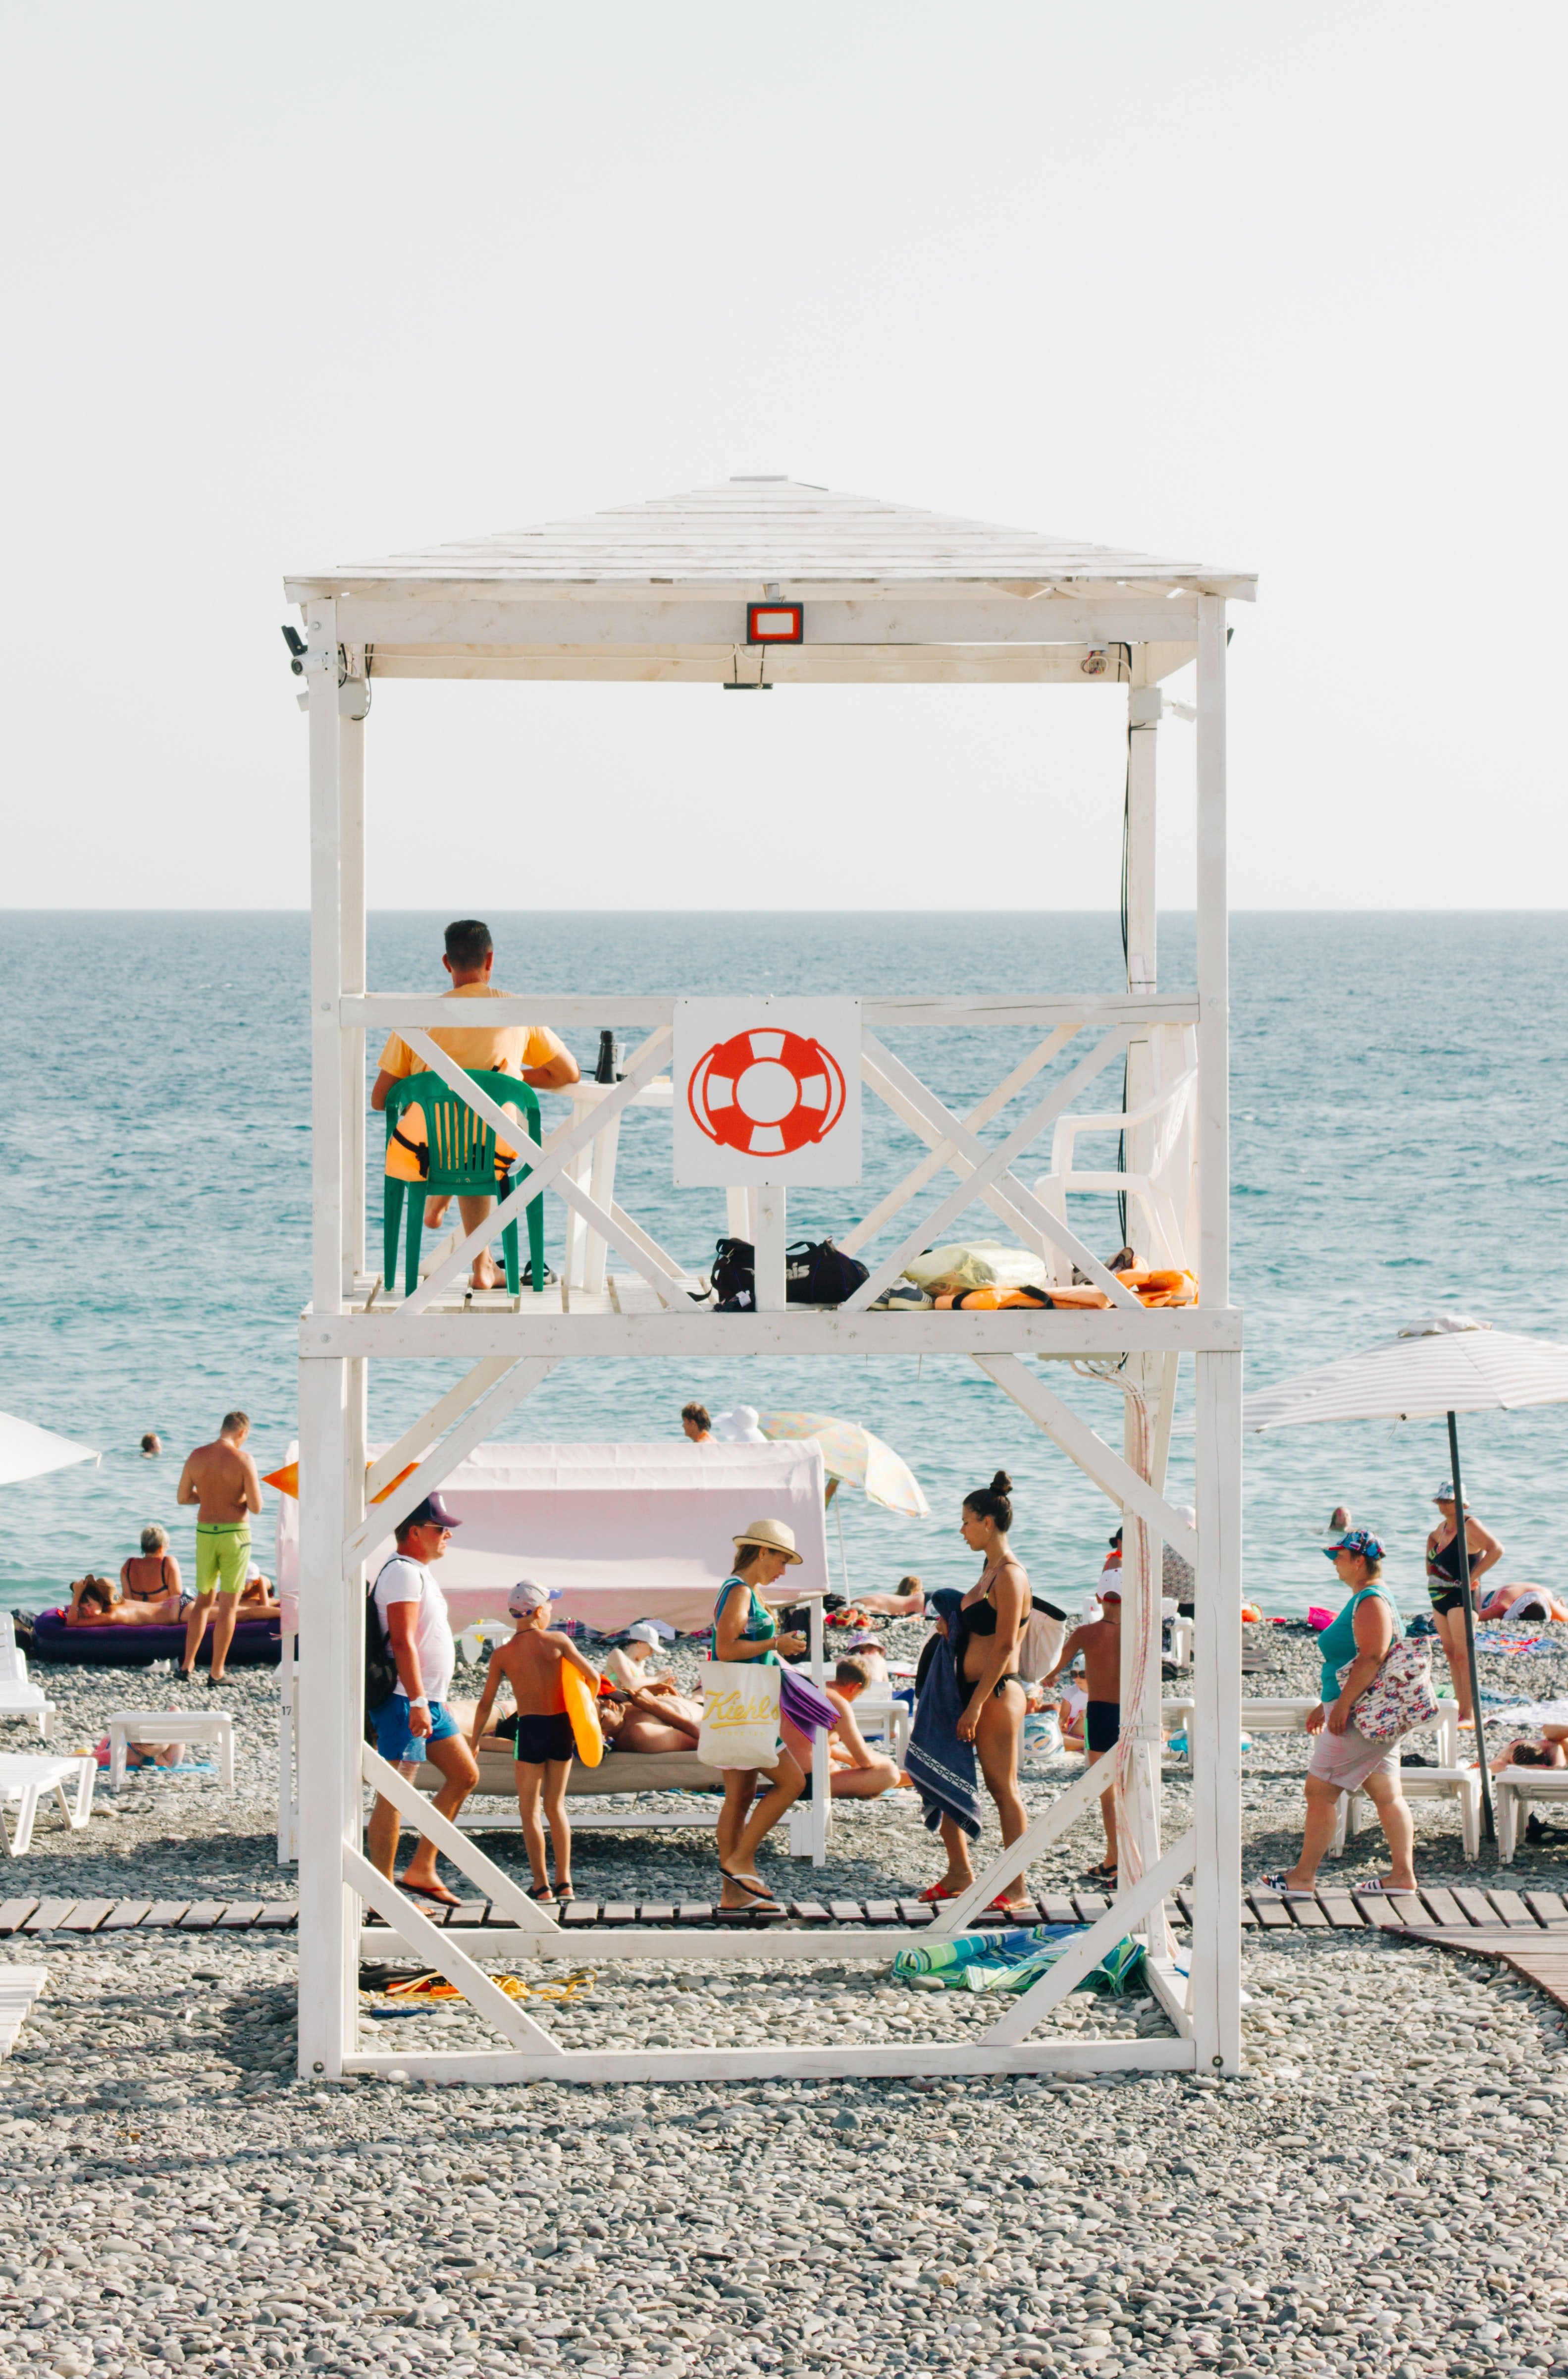 The lifeguard on duty asked Daniel to take charge while he attended to something. | Source: Pexels